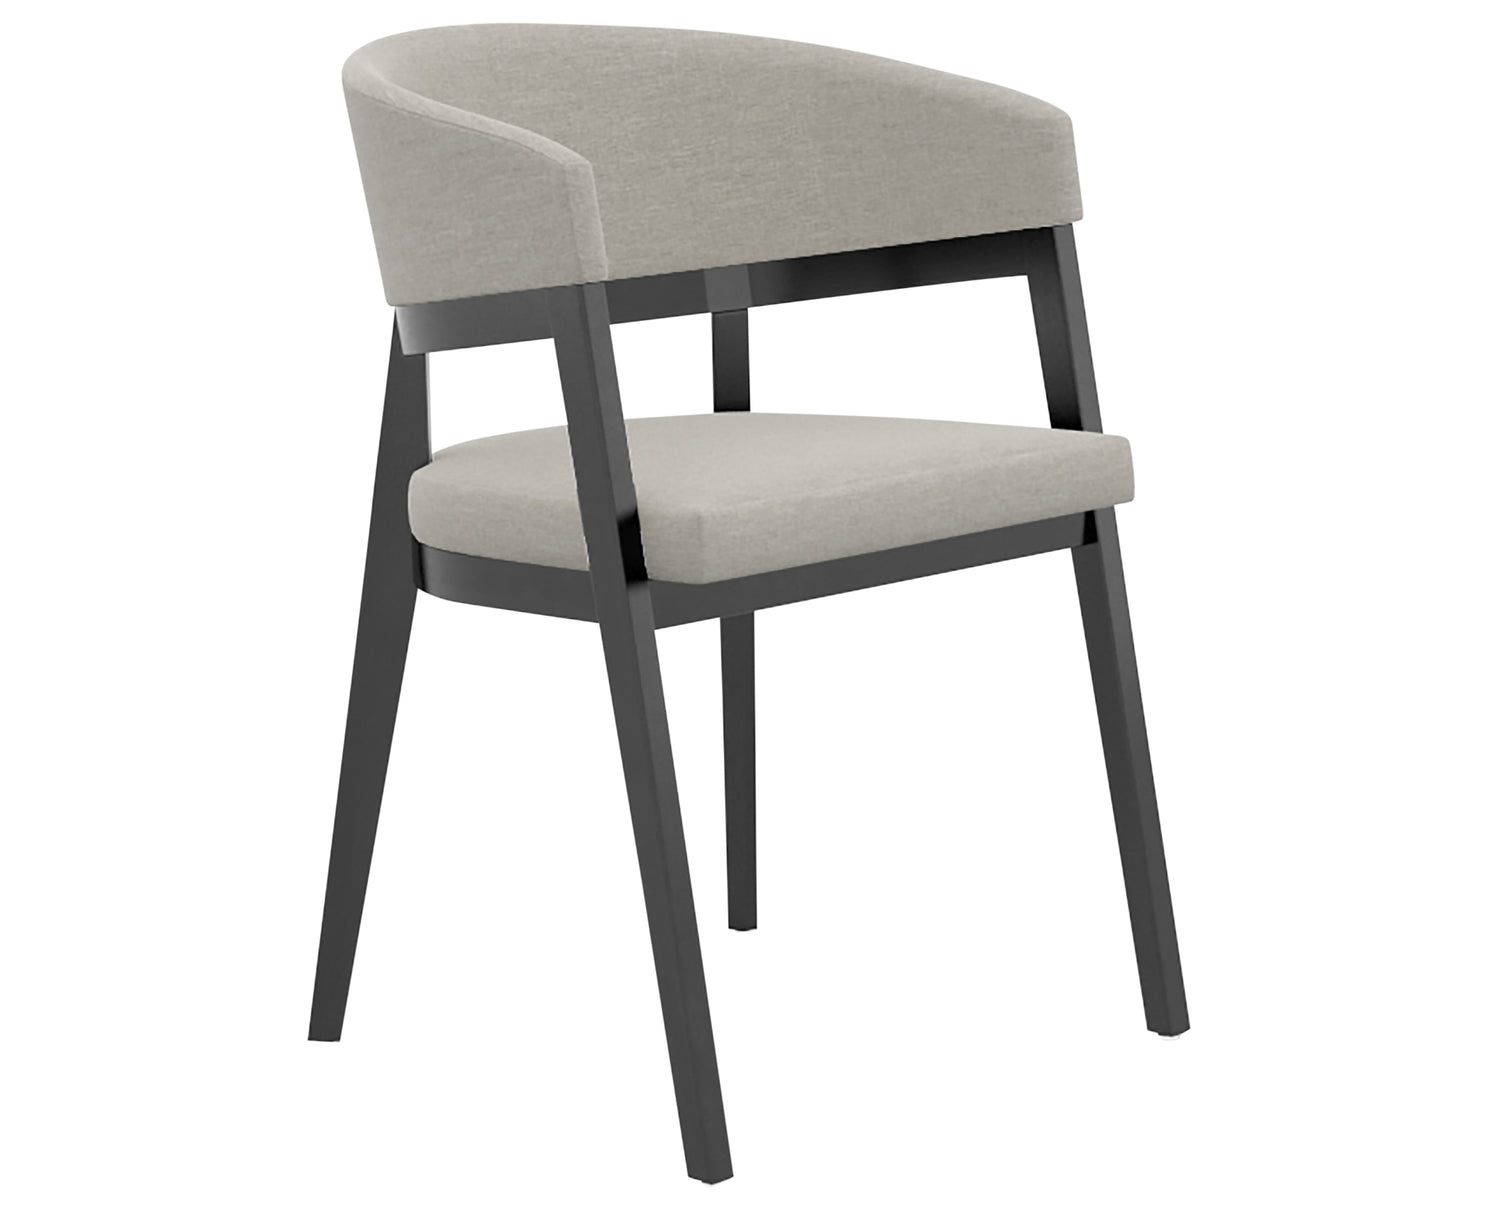 Peppercorn Washed & Fabric TB | Canadel Downtown Dining Chair 5172 | Valley Ridge Furniture